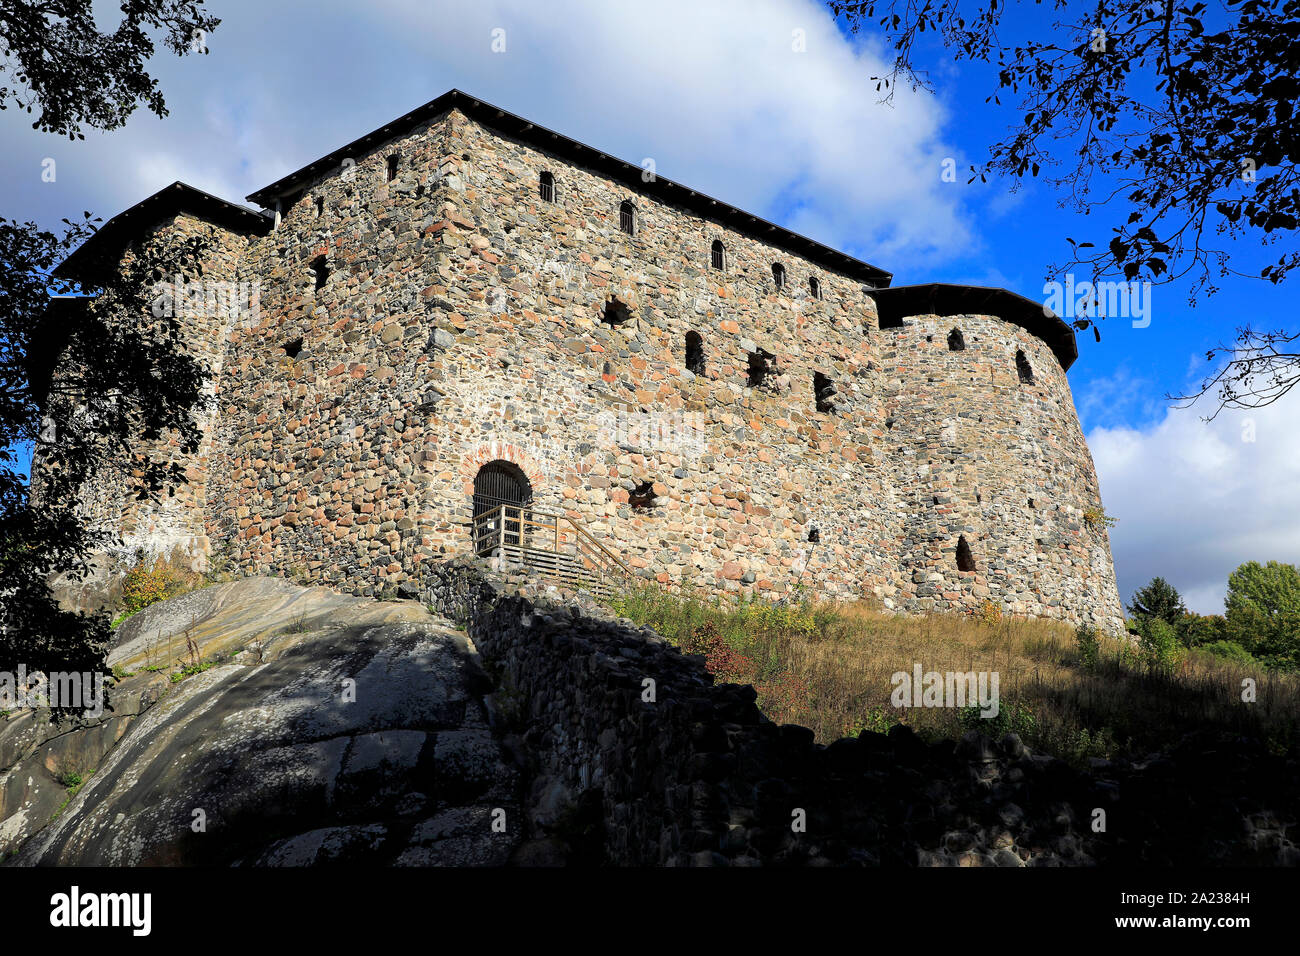 Medieval Raseborg Castle Ruins against sky in autumn. Raseborg Castle was built in 1370s on a rock that was surrounded by water at the time. Snappertu Stock Photo